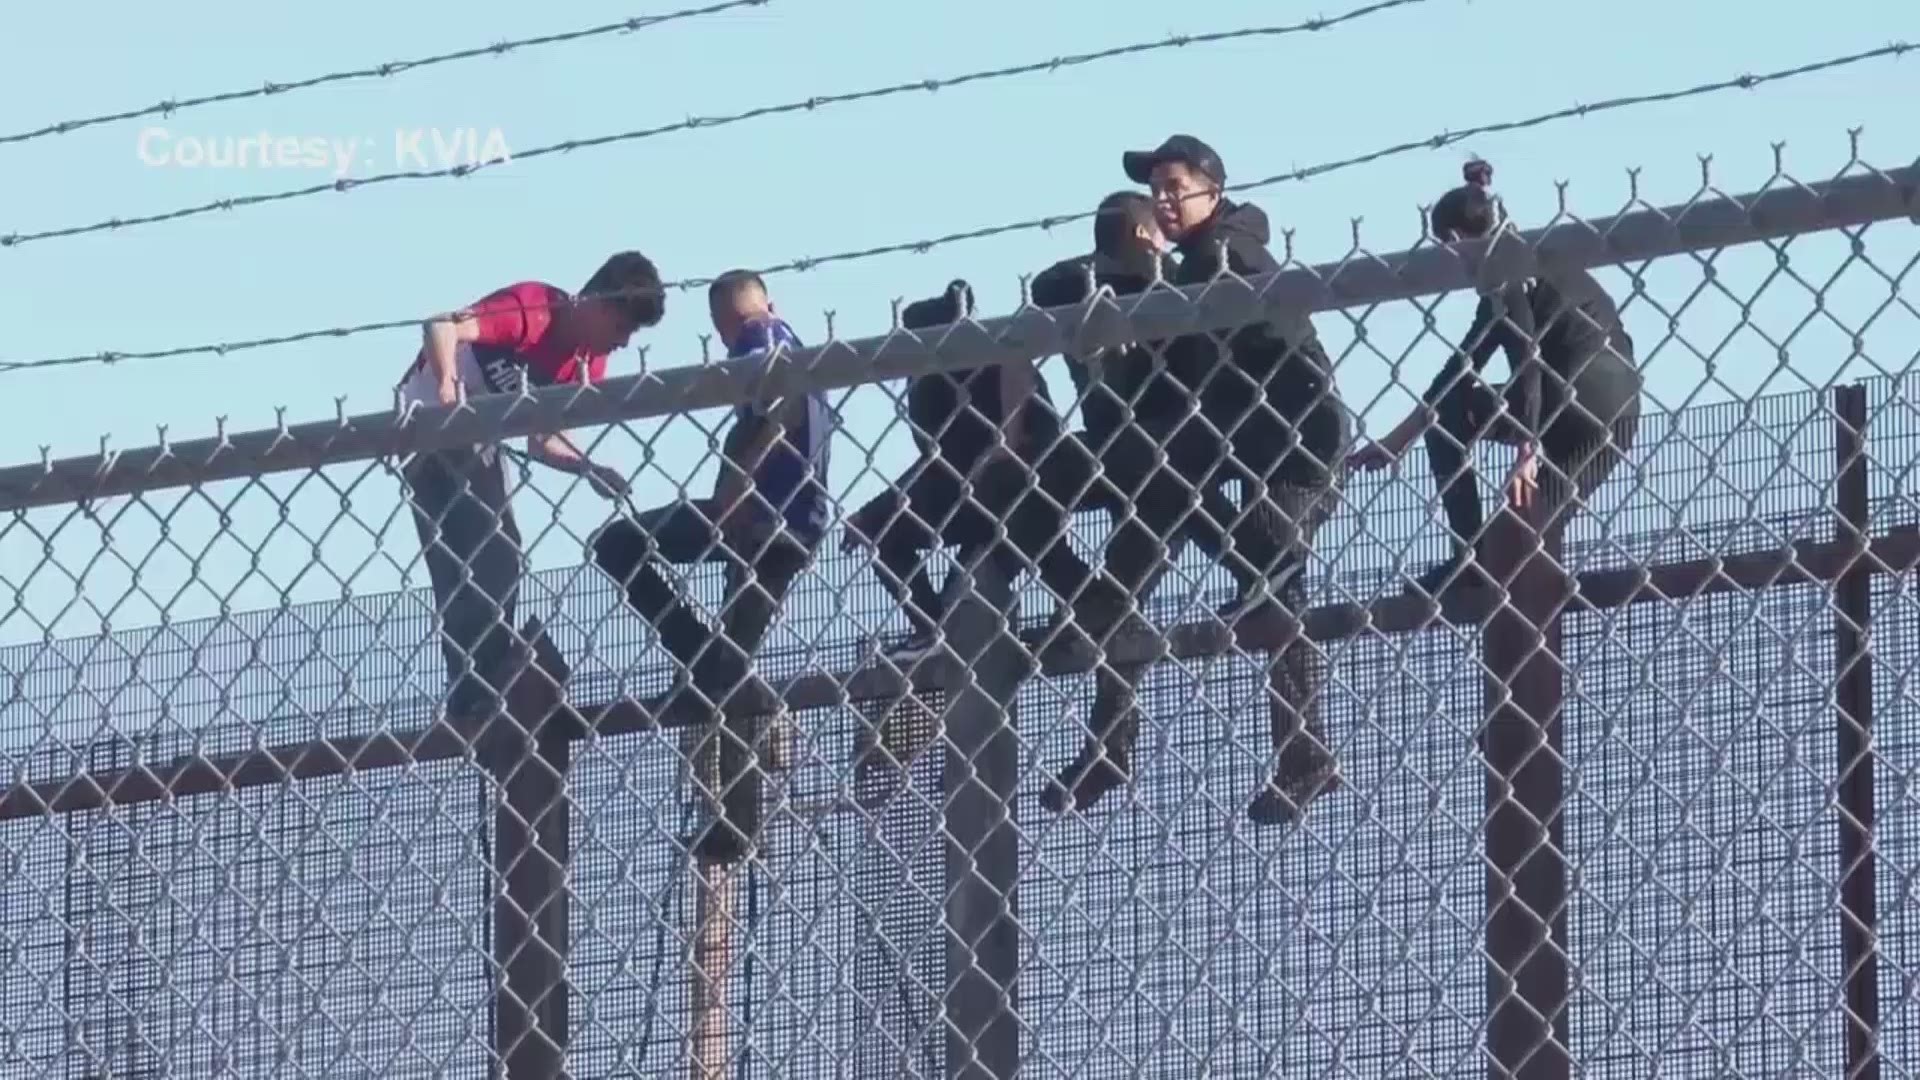 The group was climbing the border barrier not too far away from where a group of Border Patrol agents rescued a man stuck in a canal grate.